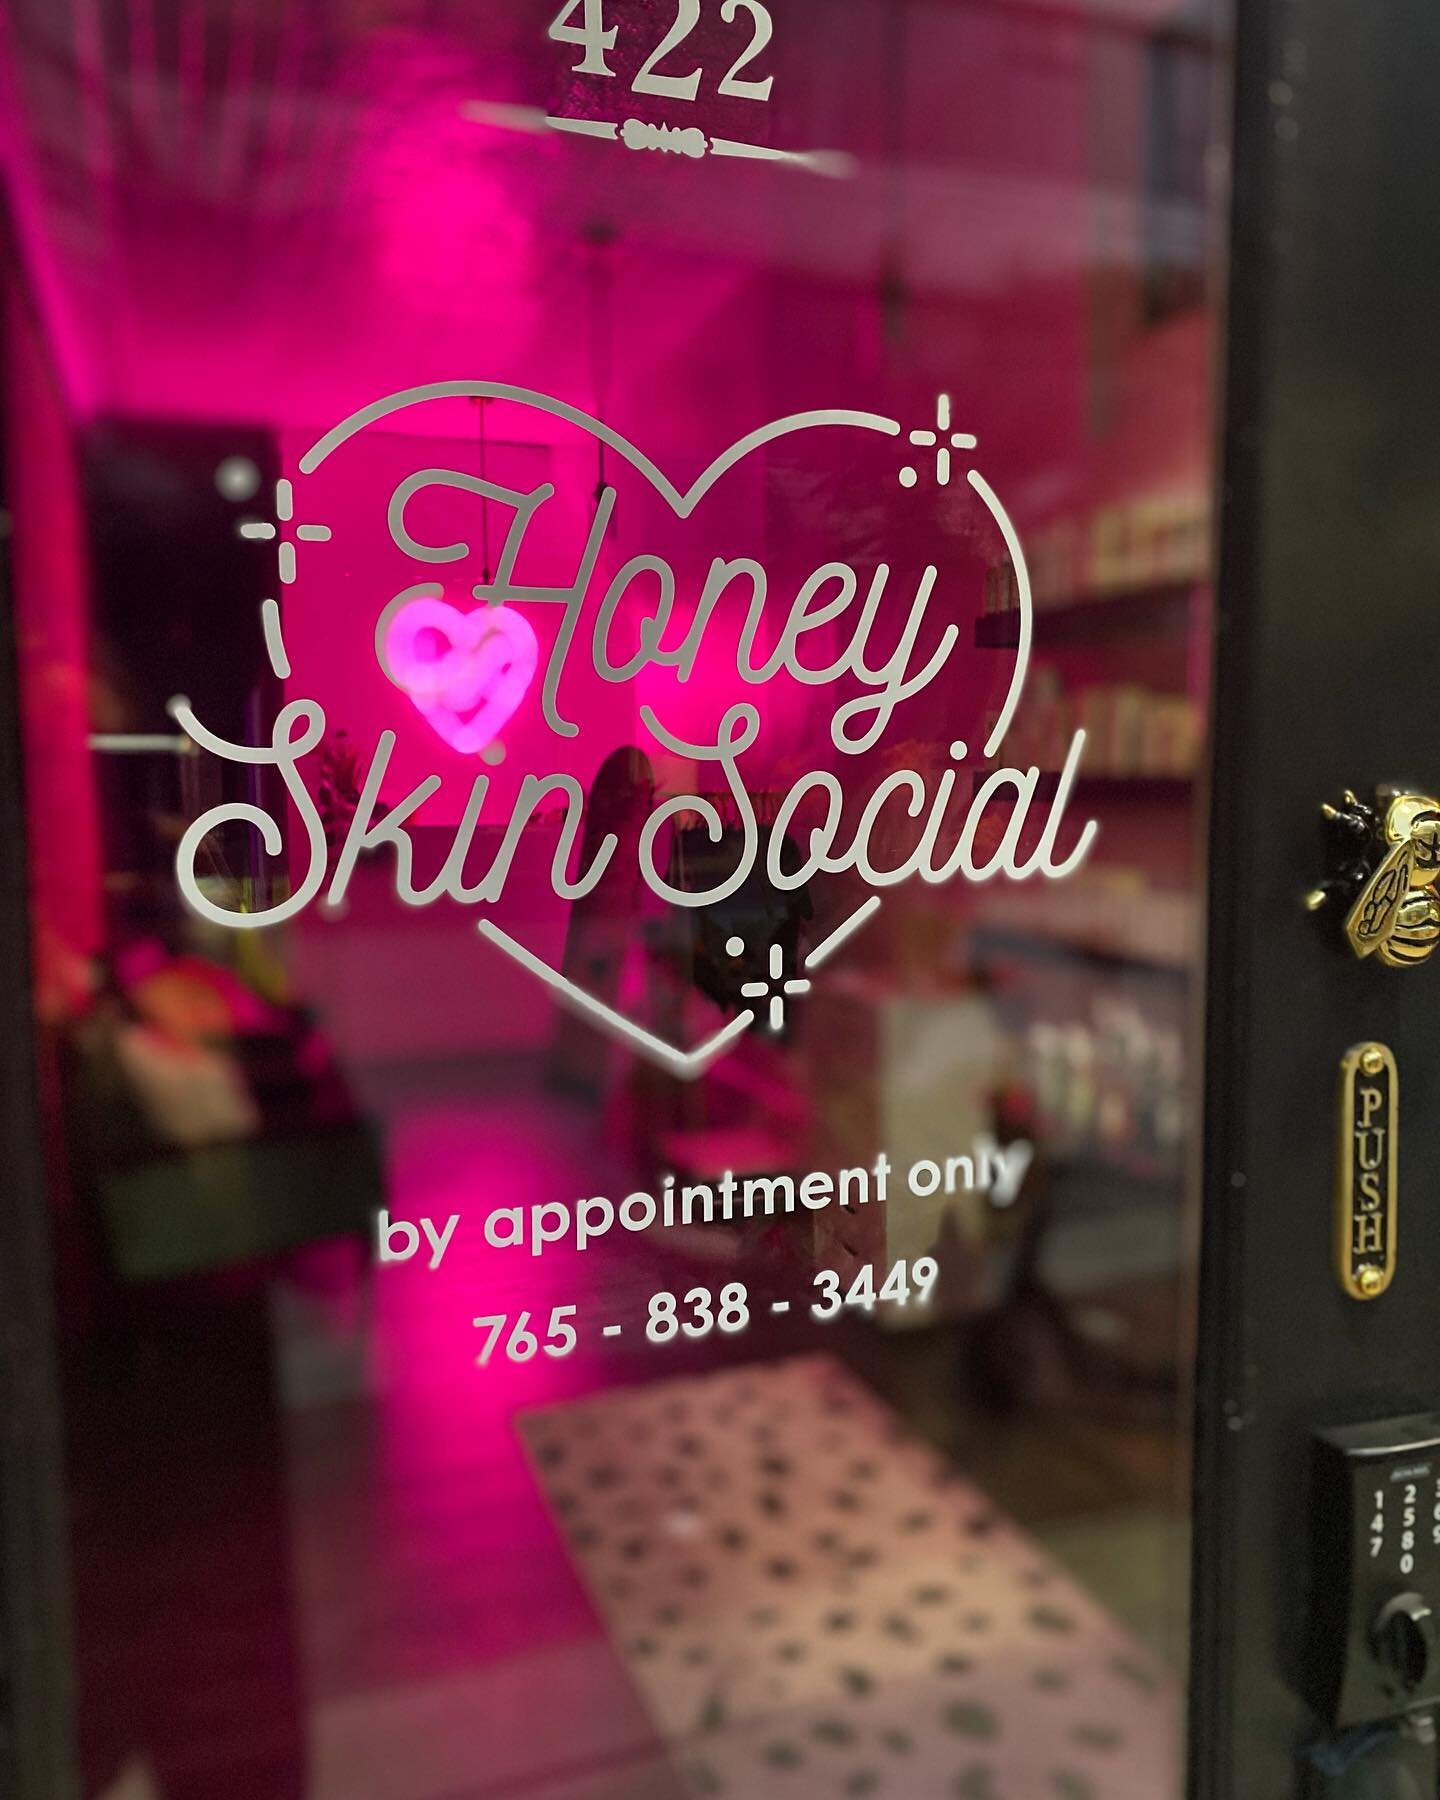 Good Morning, Honey 🖤☀️ The Social is waiting for you 🐝 🍯 Schedule your next appointment with @honeyskinchristina or @lalalaceybee 🖤 #thesocial #seeyouthere #indianaspa #indianaestheticians #beauty #letssocialize #womensupportingwomen #womanowned